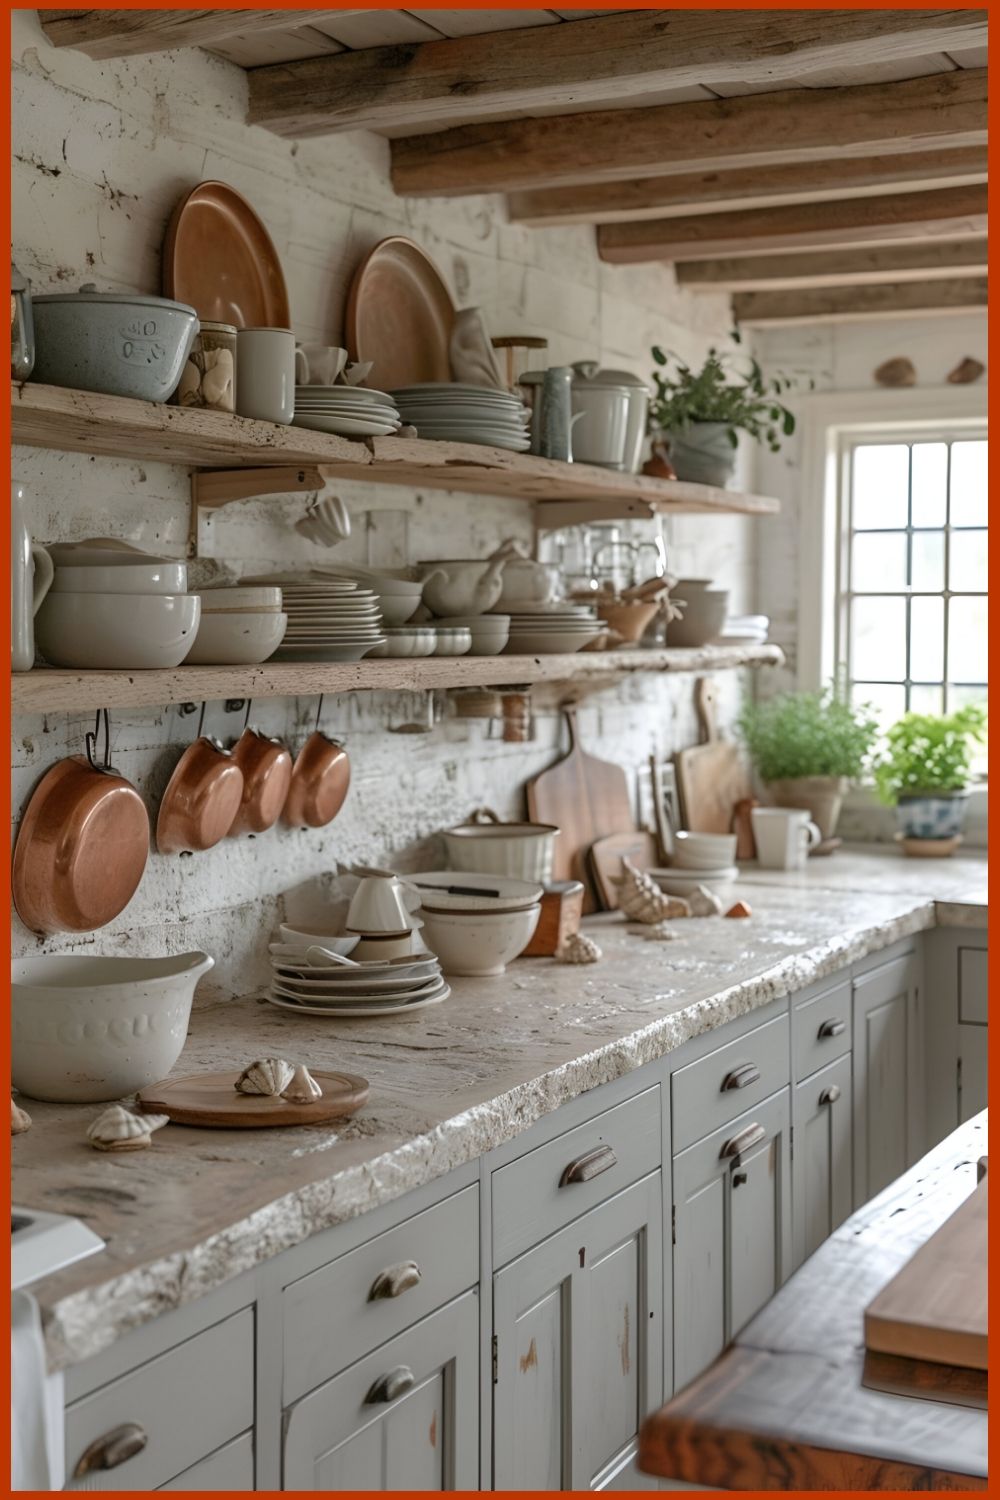 Charming Rustic Decor for the Country Kitchen